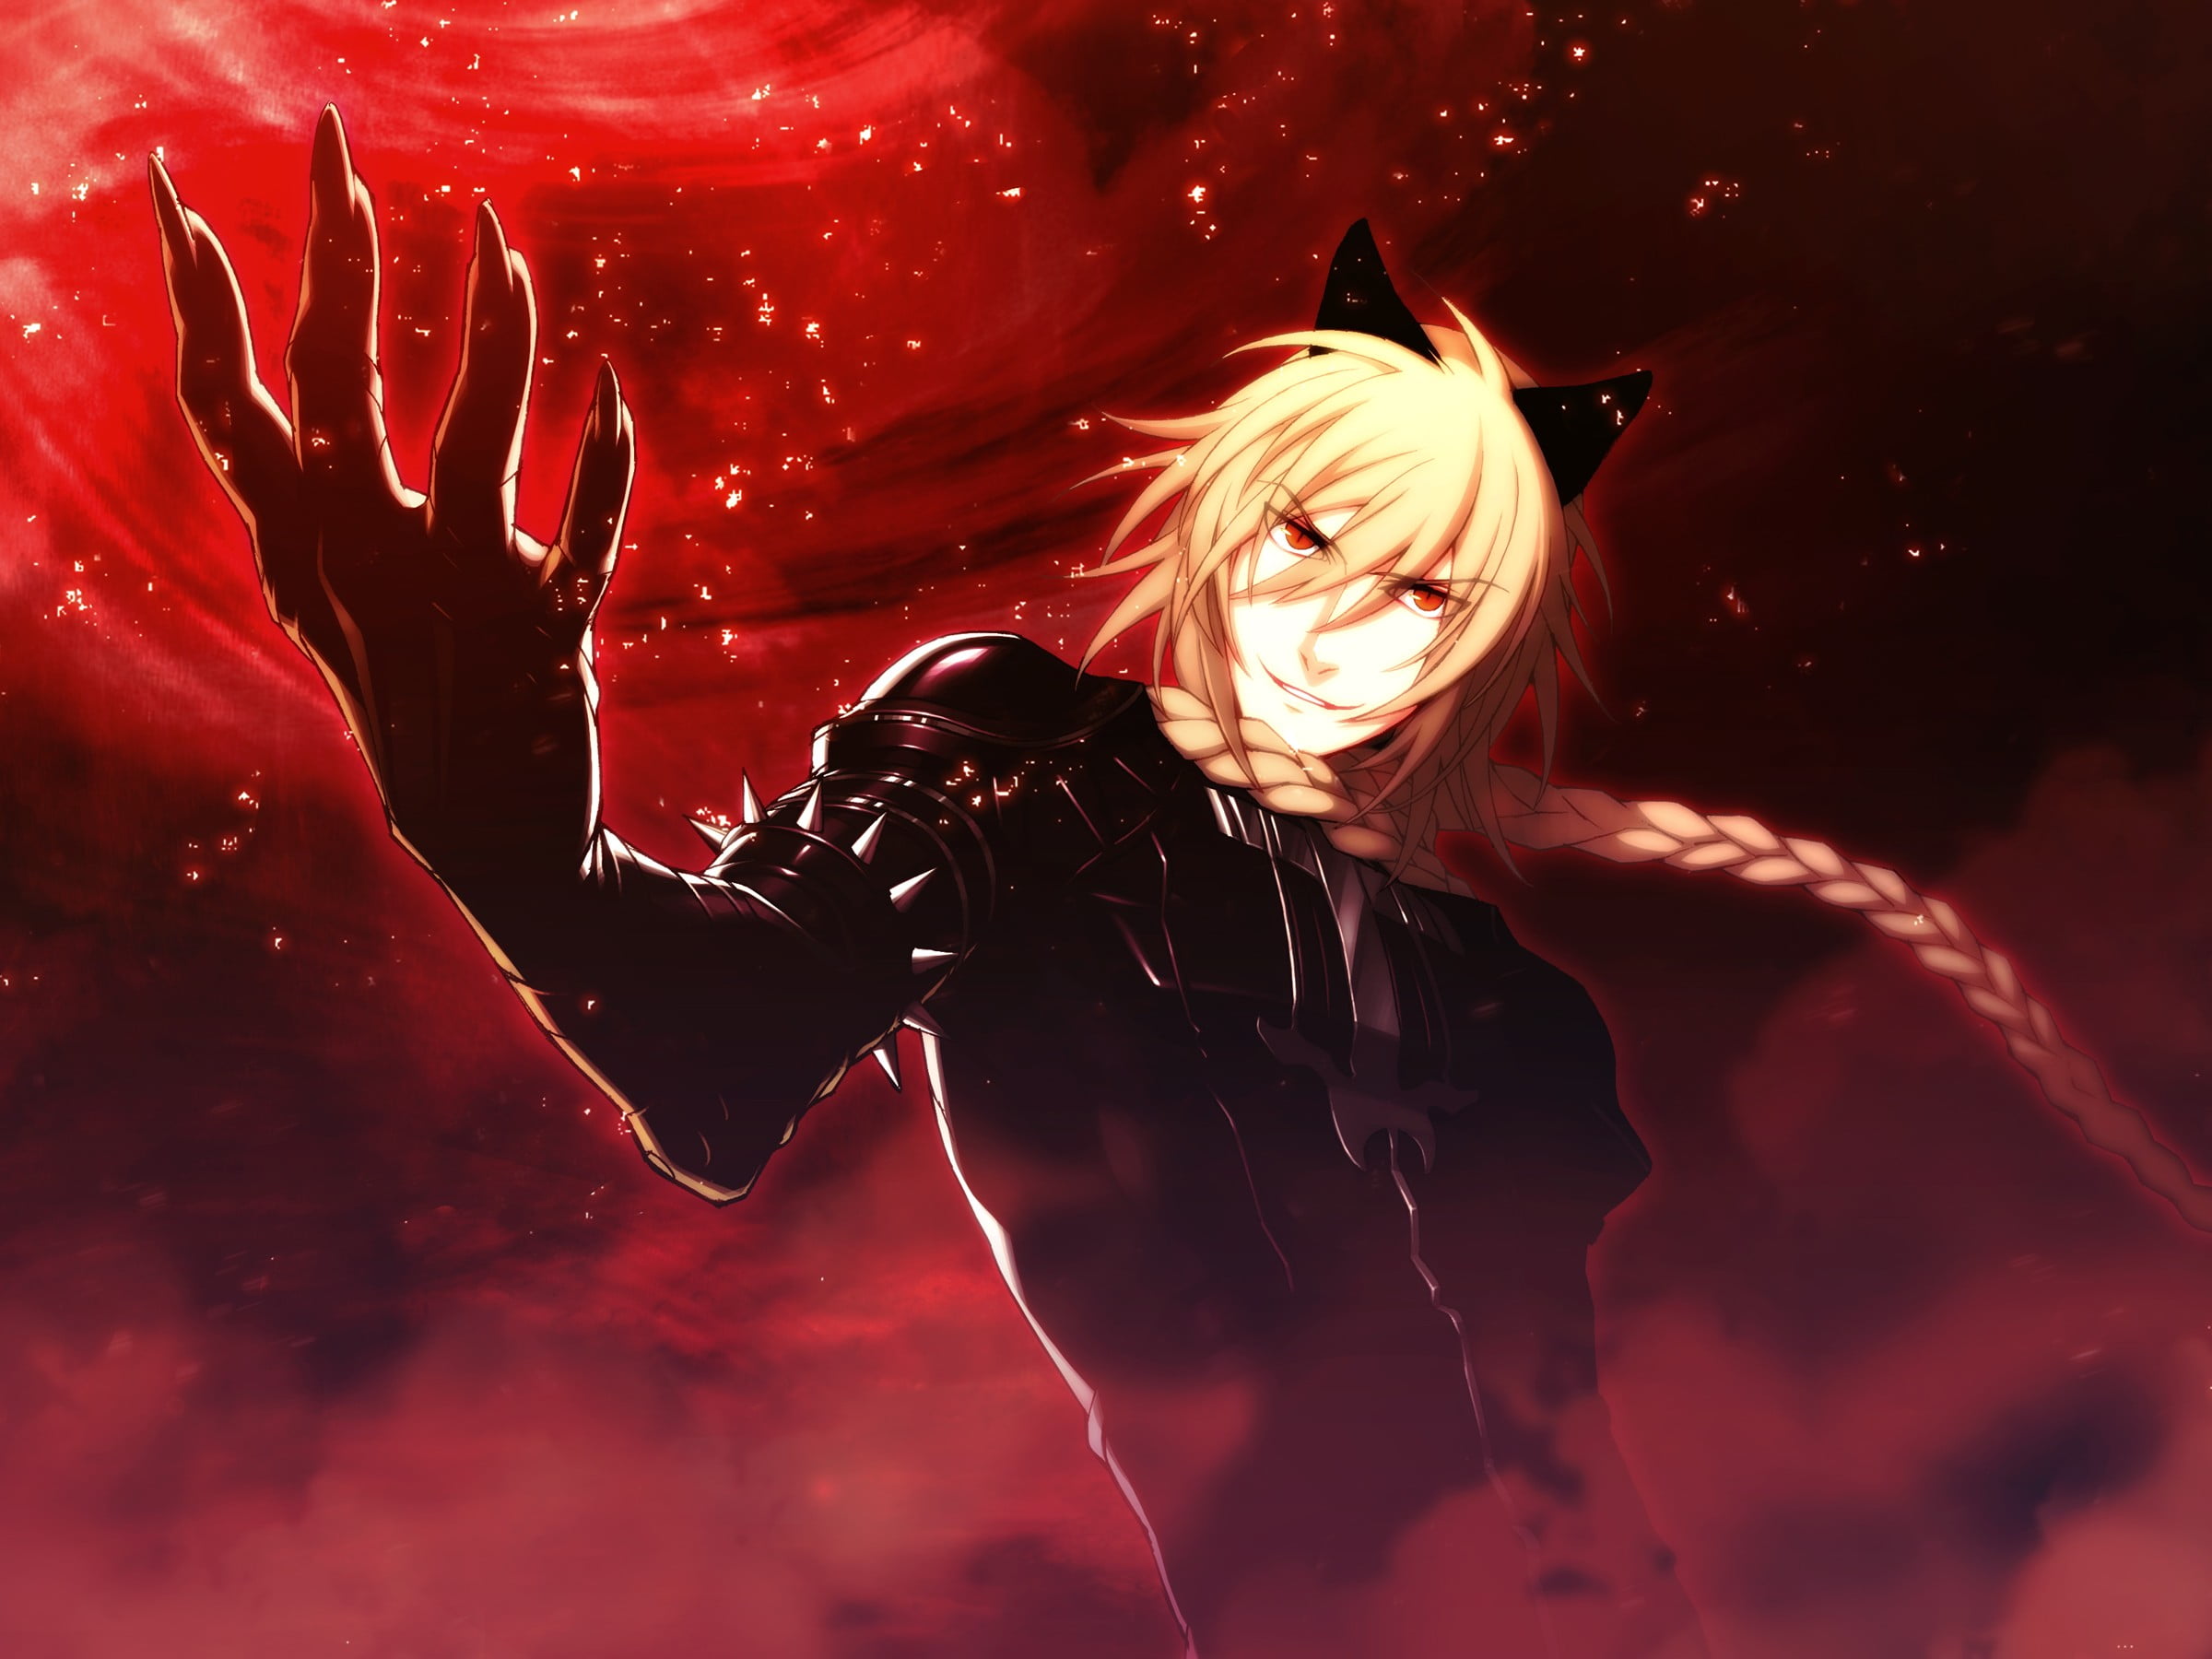 male anime character digital wallpaper, anime boys, red, one person